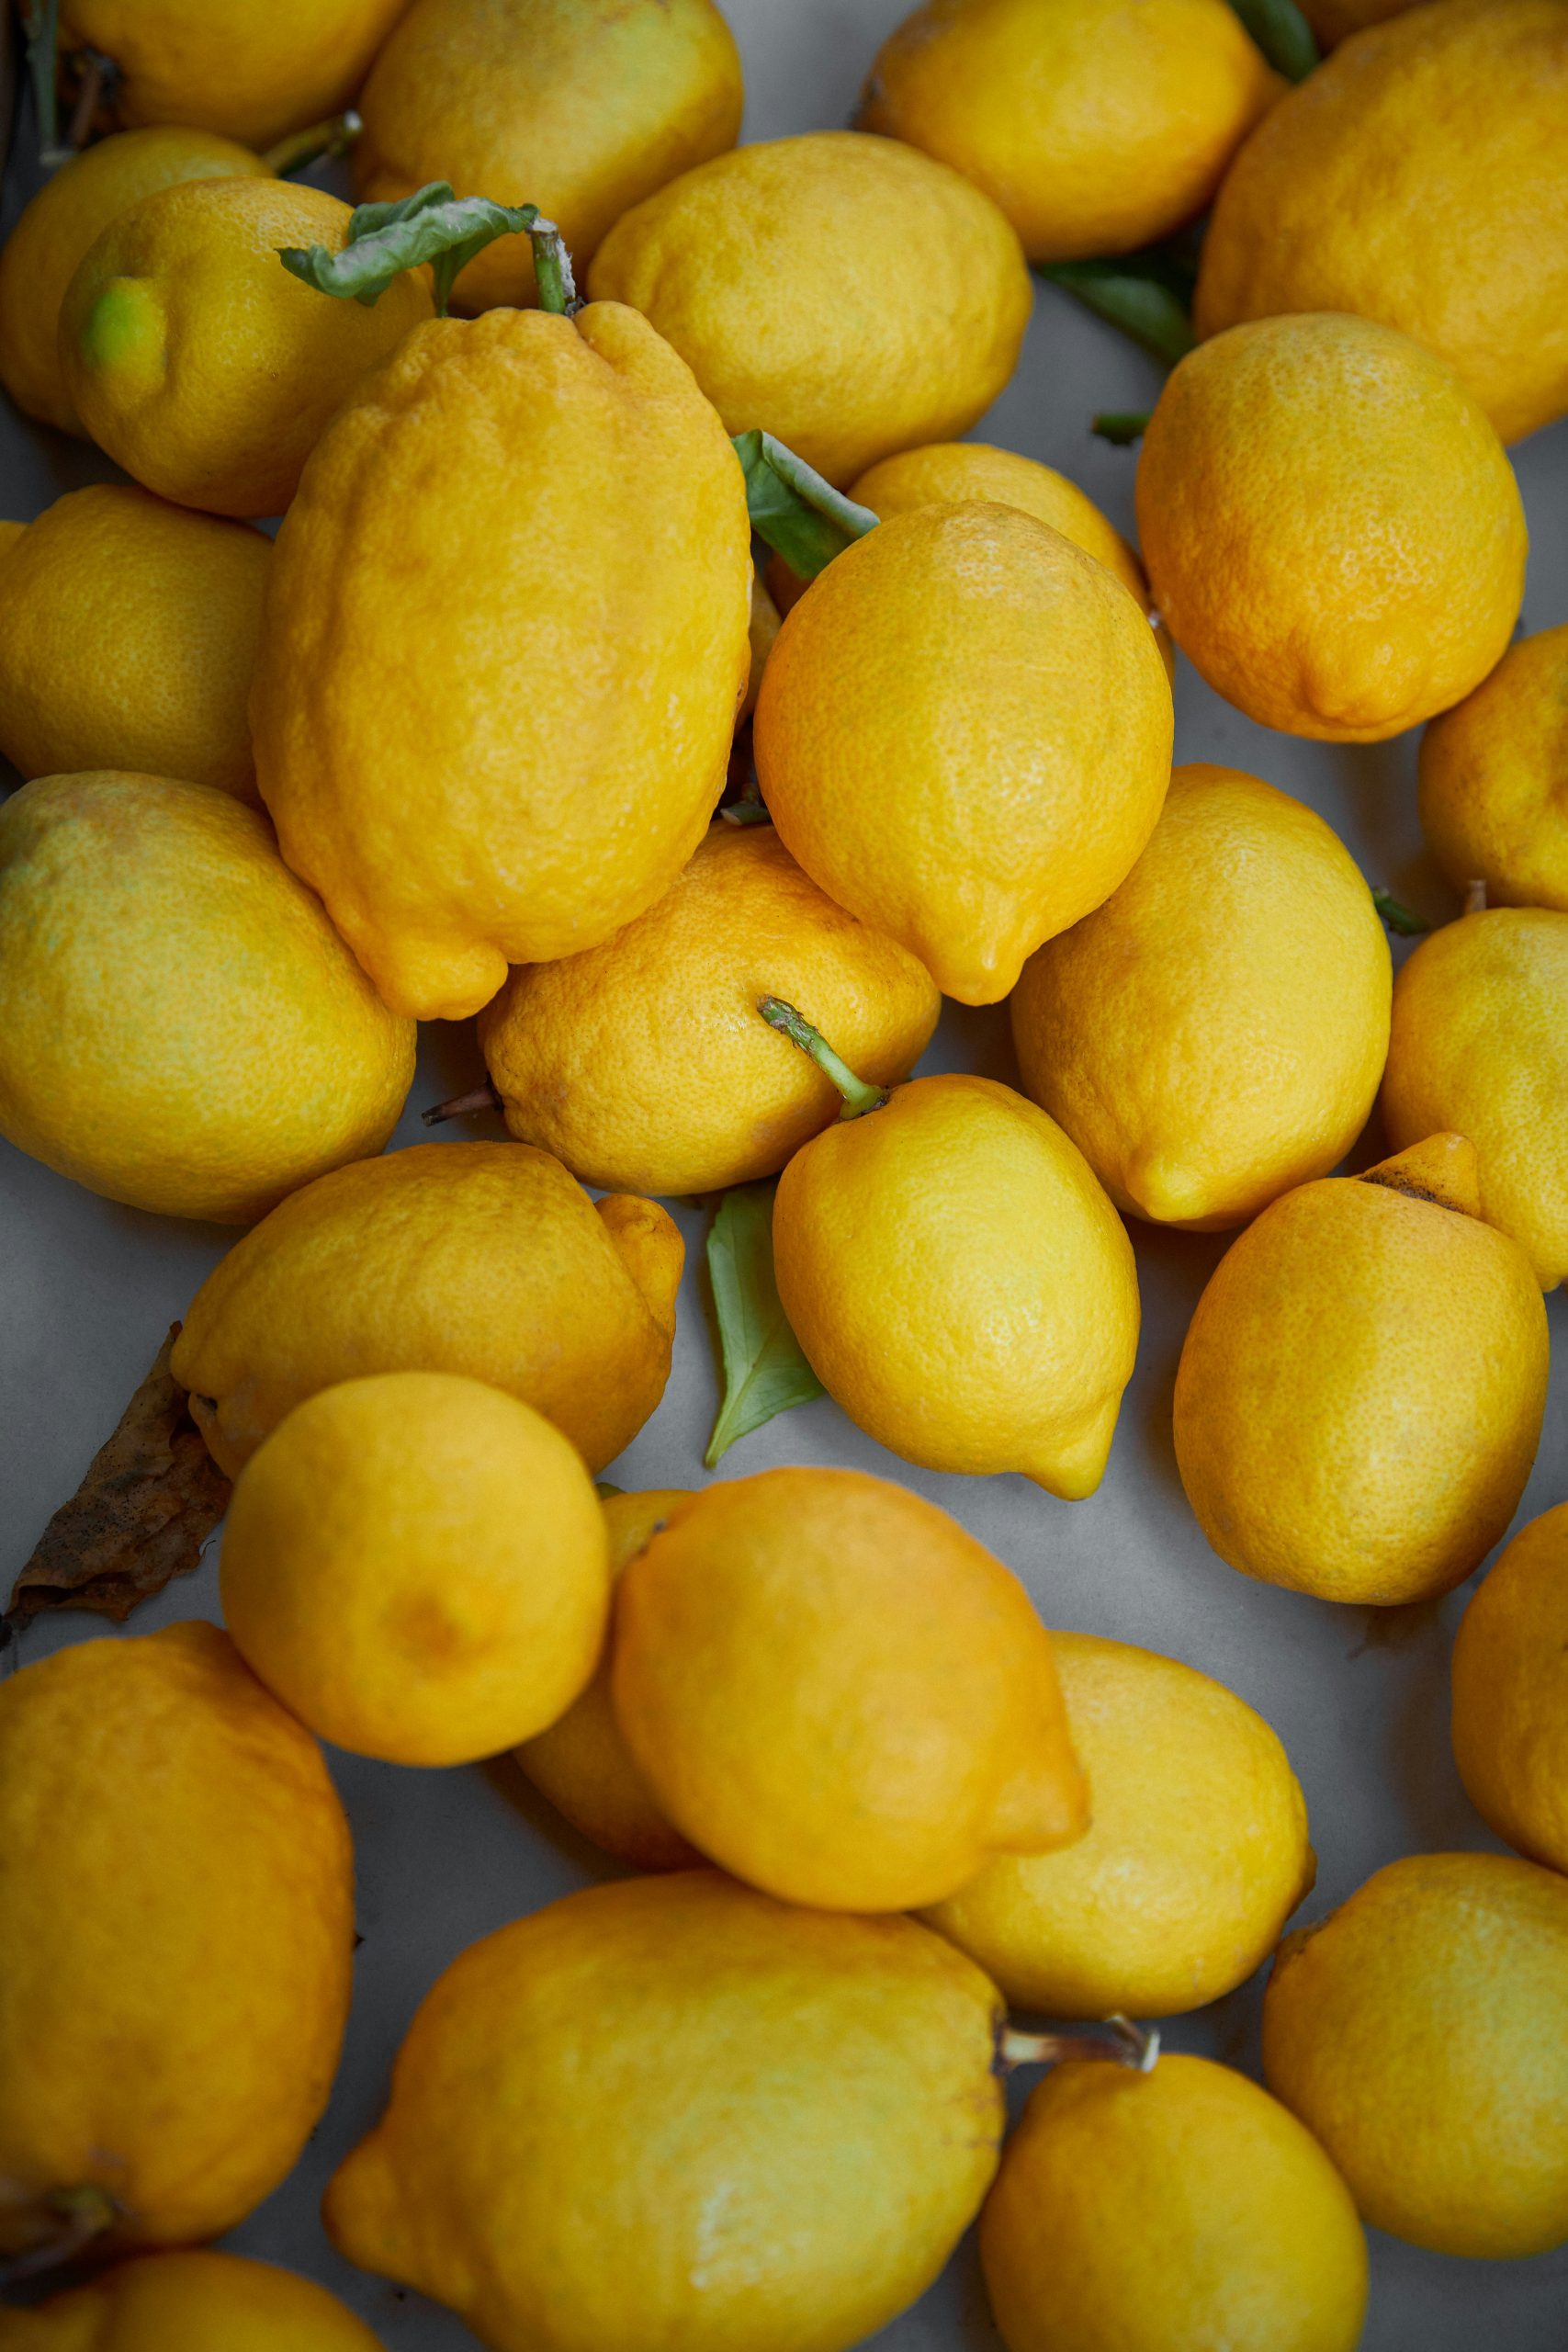 Recipes for When Life Gives You Lemons